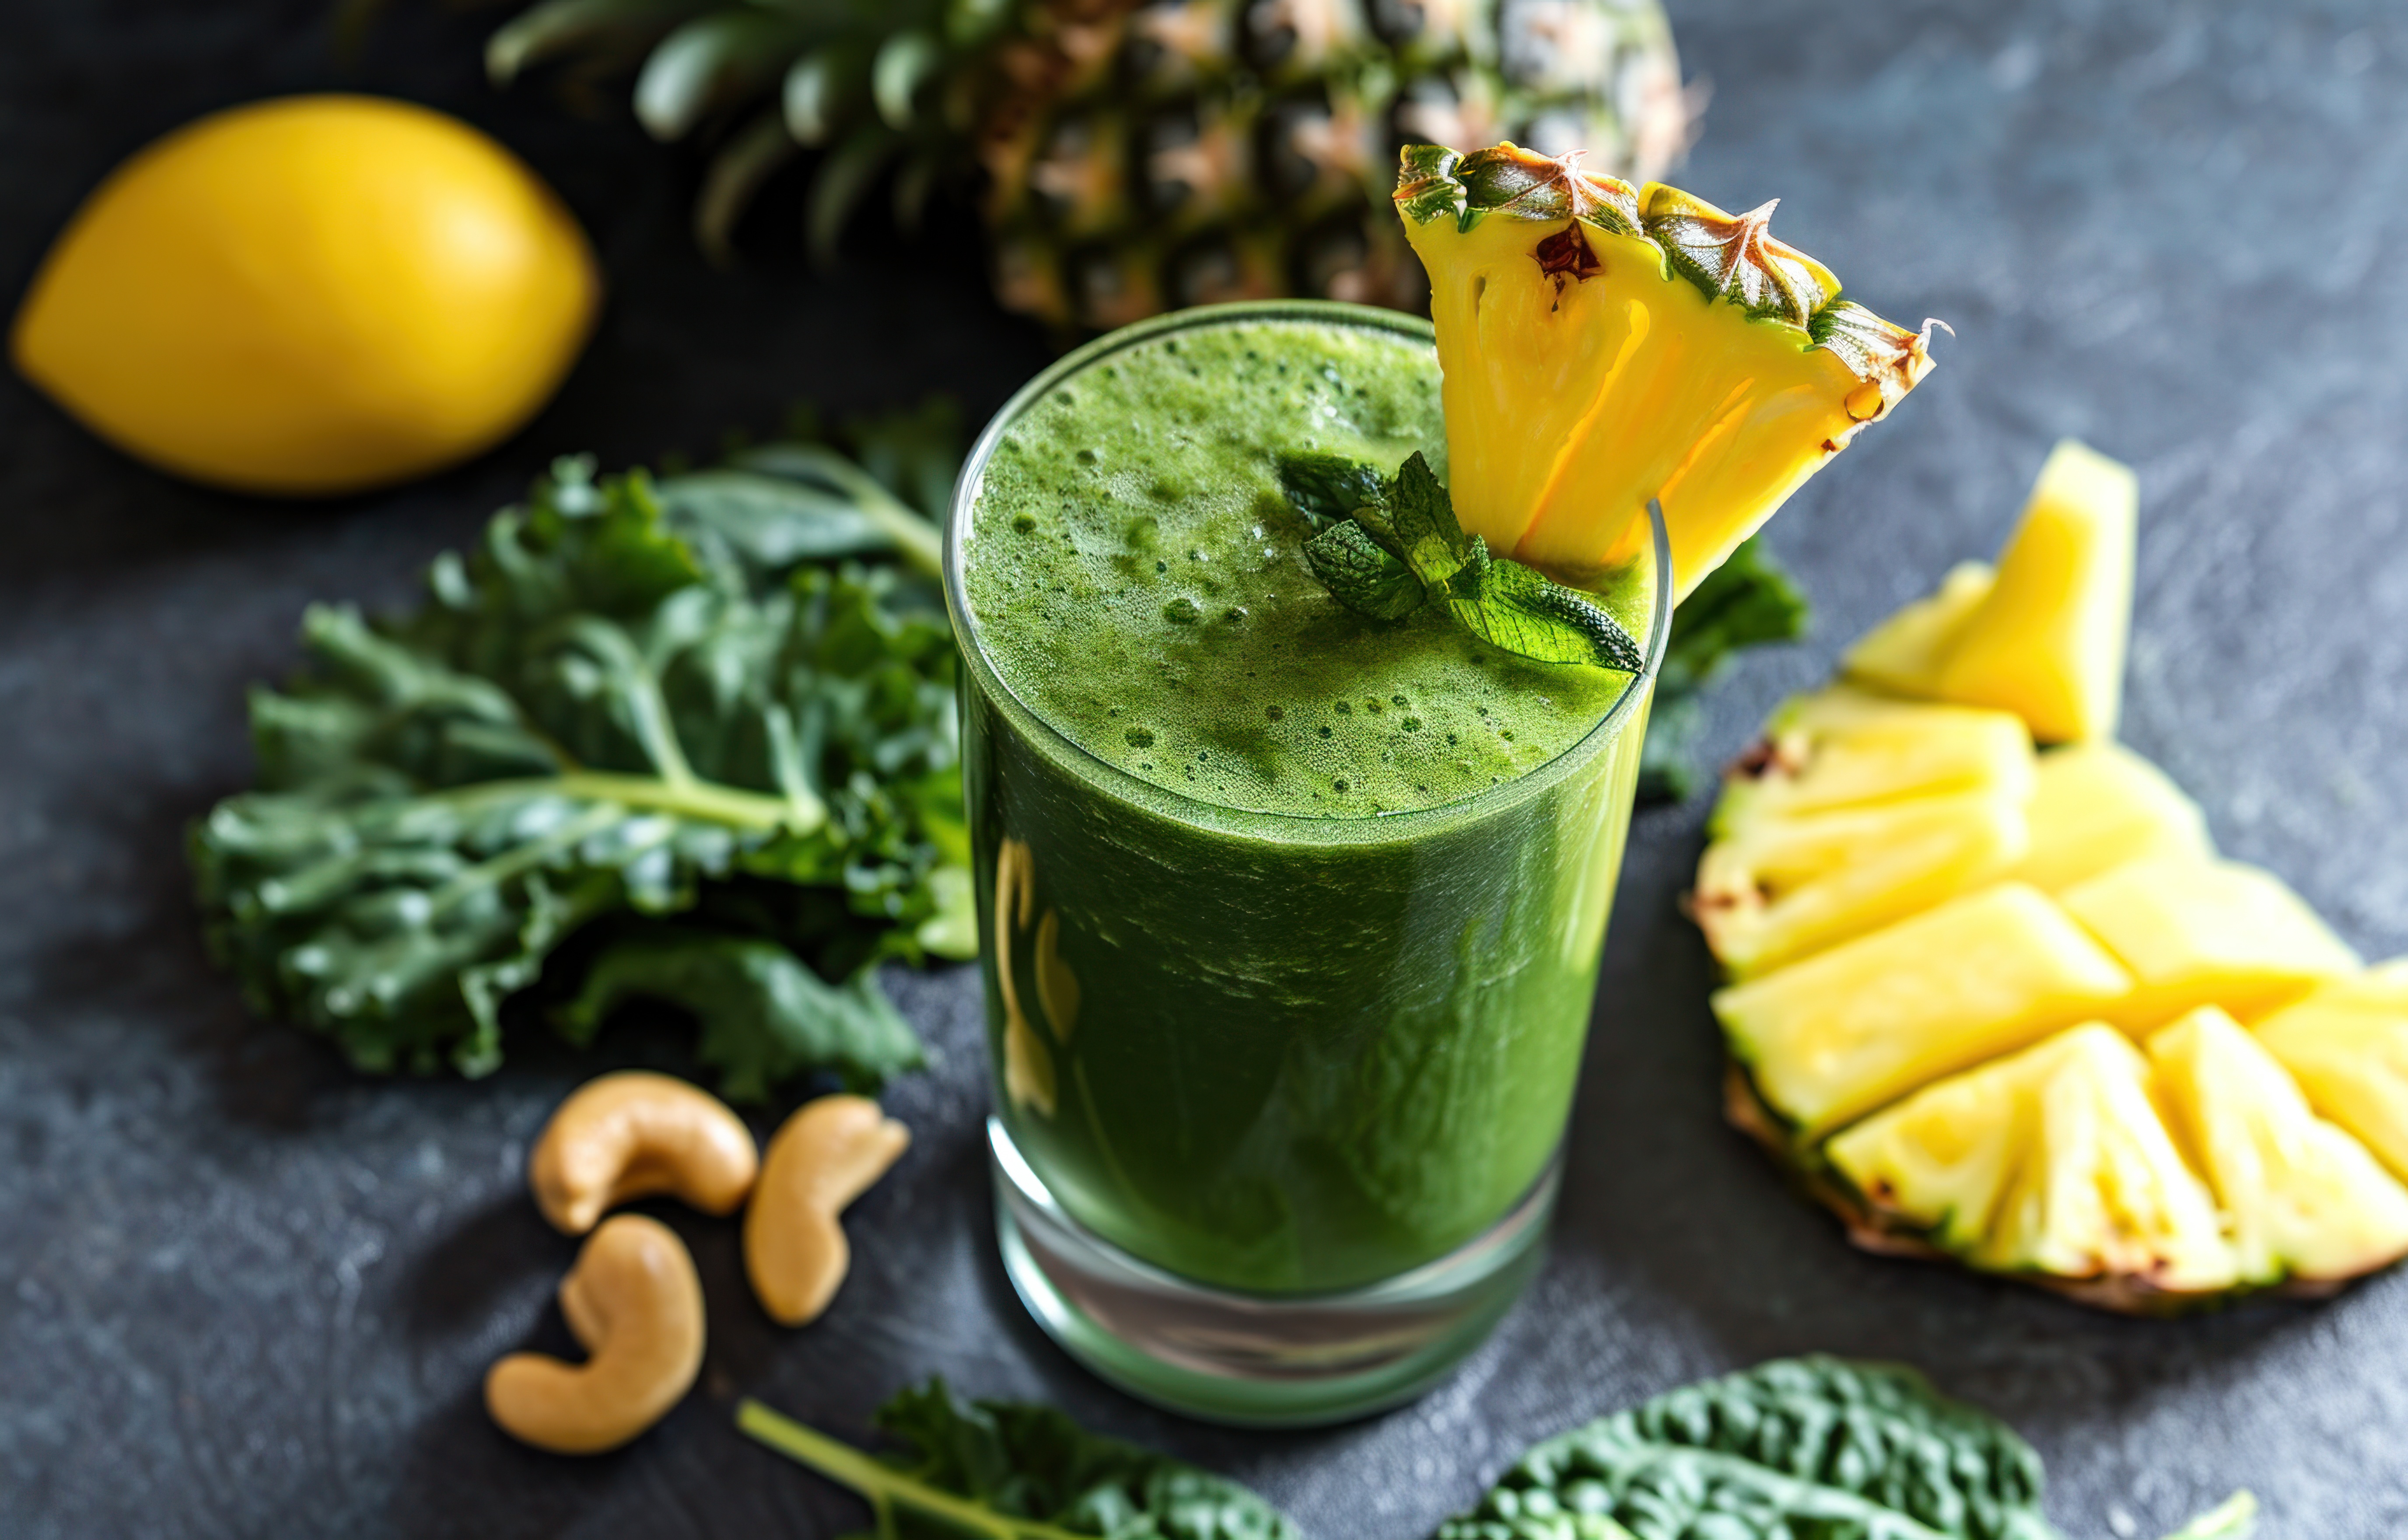 Use these simple nutrient dense kale recipes to add energy into your day! You will be amazed how the benefits of kale will transform your health.